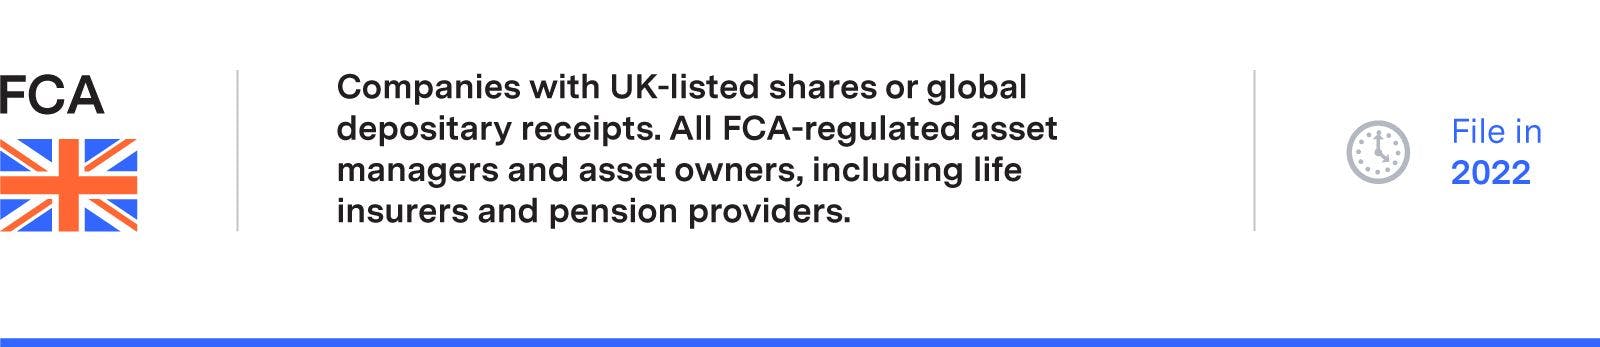 FCA requirement: Companies with UK-listed shares or global depositary receipts. All FCA-regulated asset managers and asset owners, including life insurers and pension providers. File in 2022.